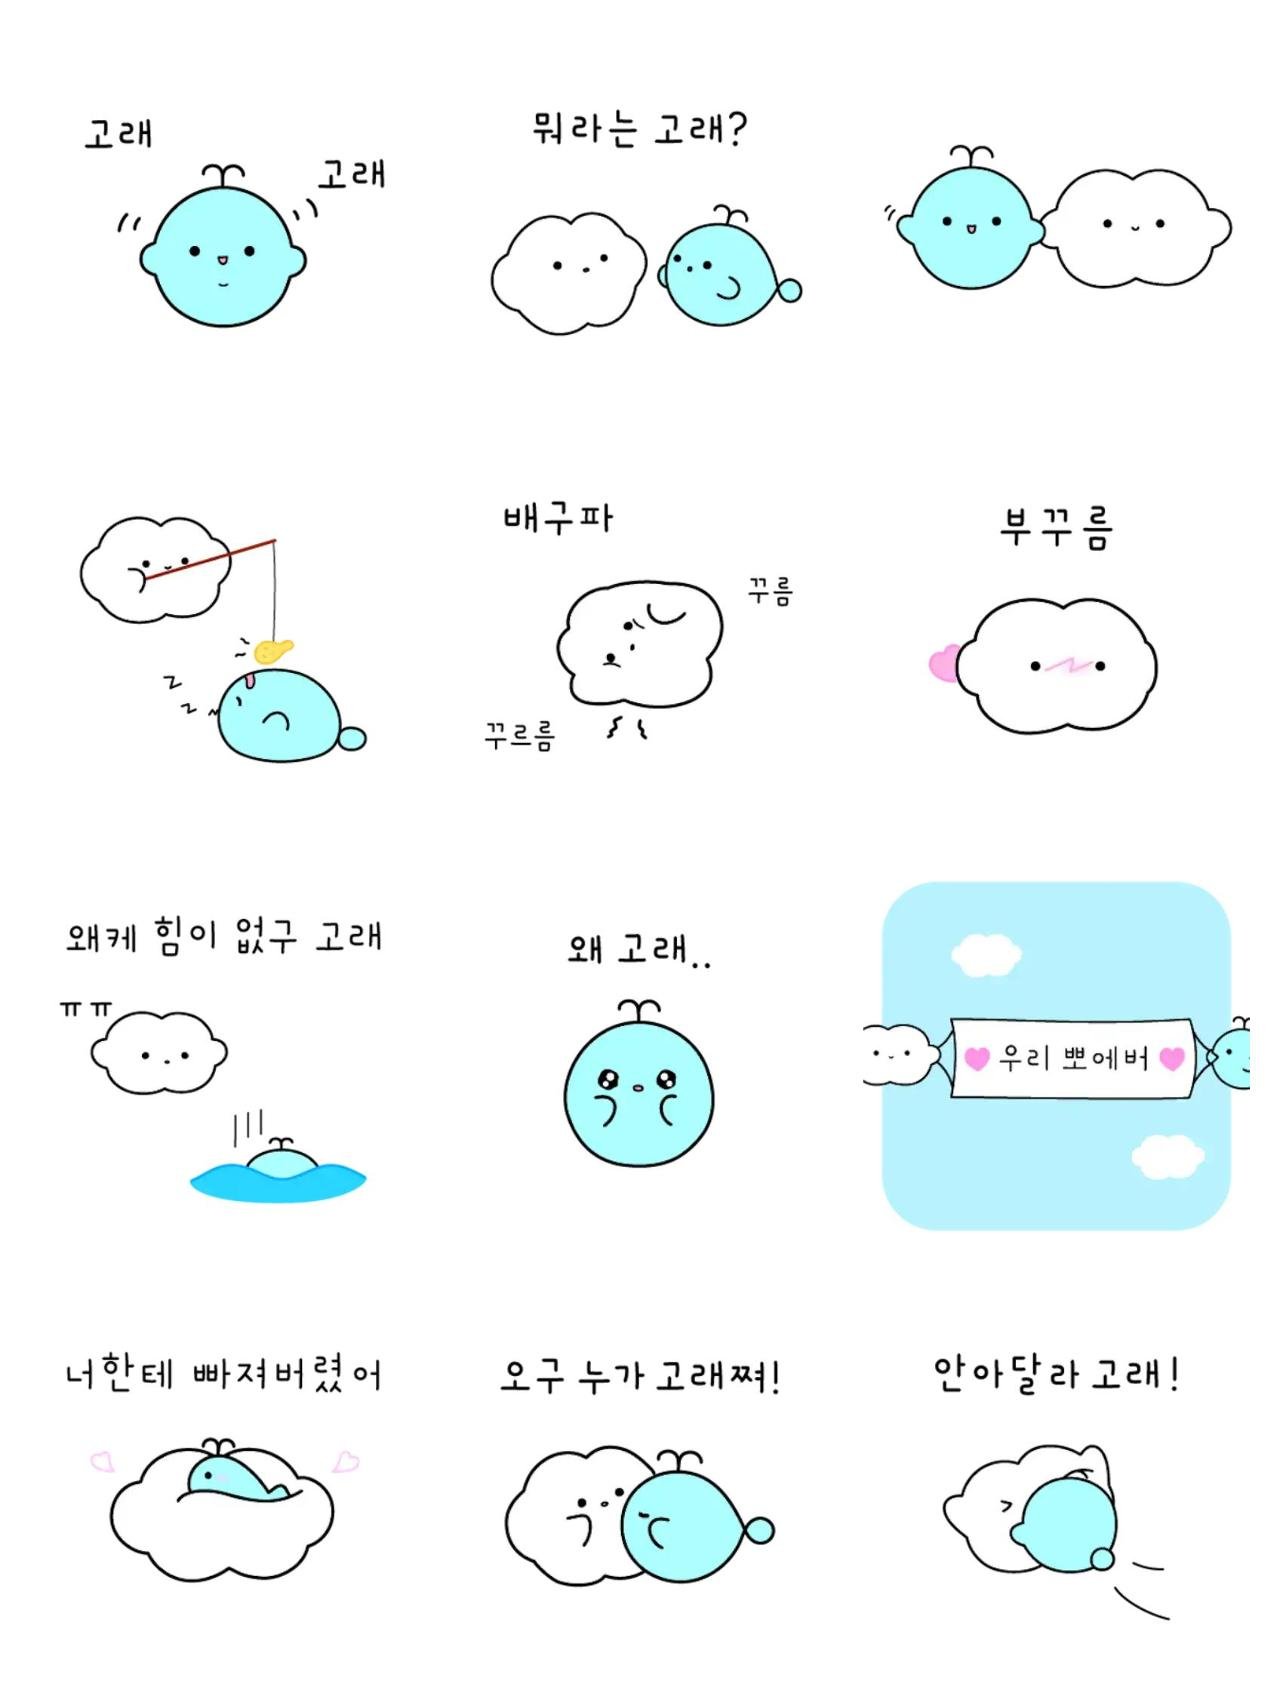 the whale falling in the cloud 2nd Animals sticker pack for Whatsapp, Telegram, Signal, and others chatting and message apps